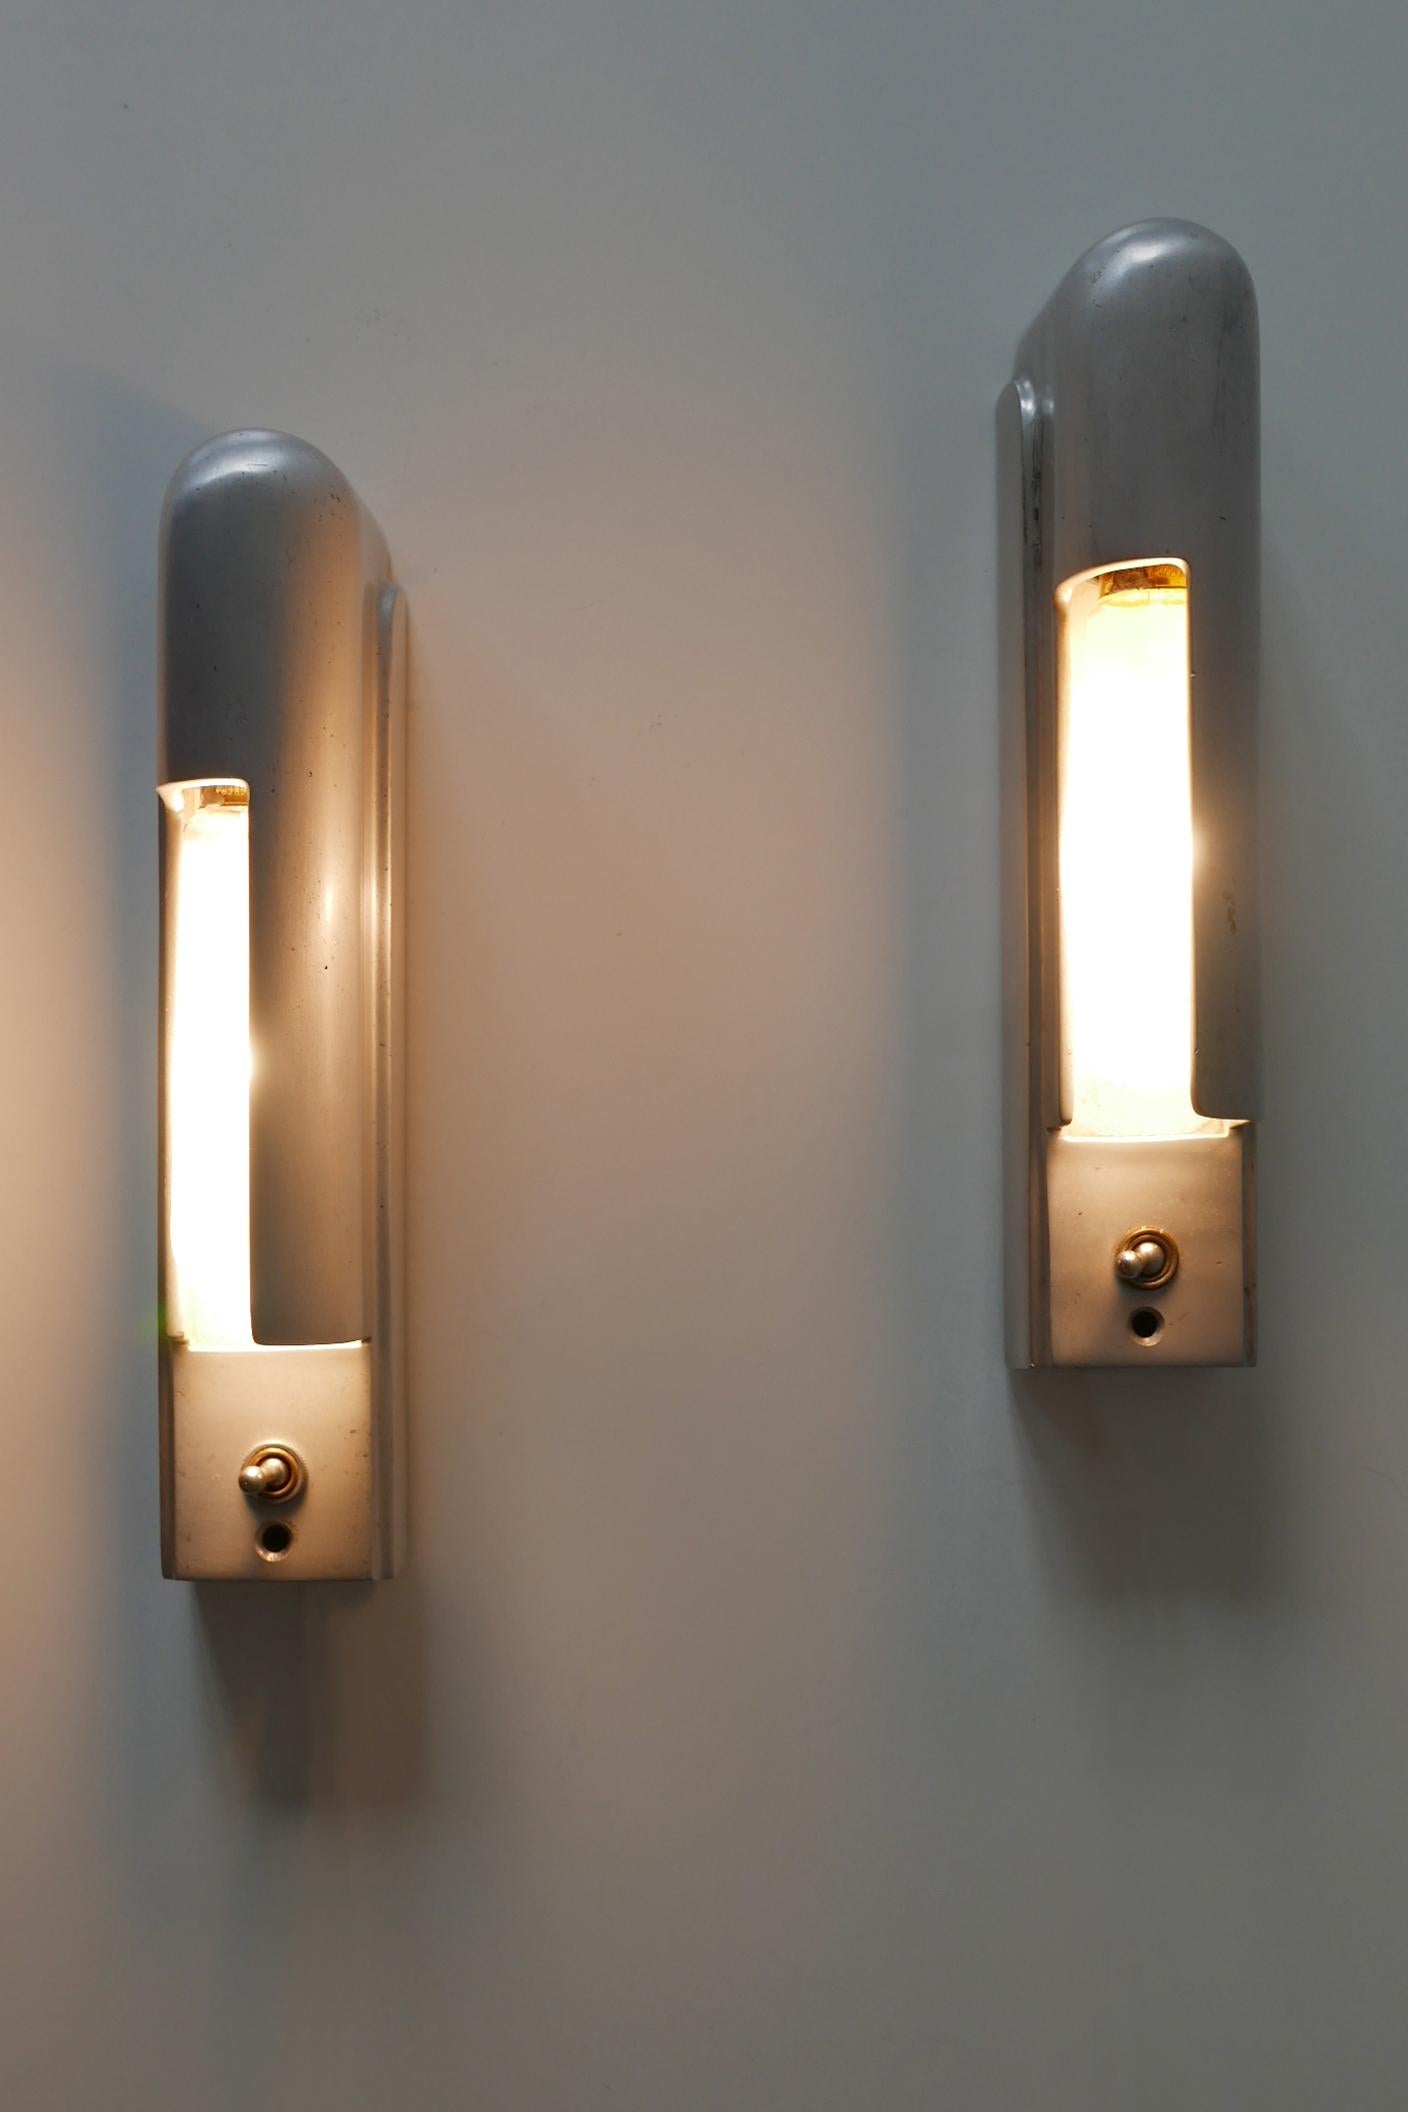 Mid-Century Modern Rare Set of Two Streamline Cruise Ship Cabin Sconces by The Simes Co NY, 1930s For Sale